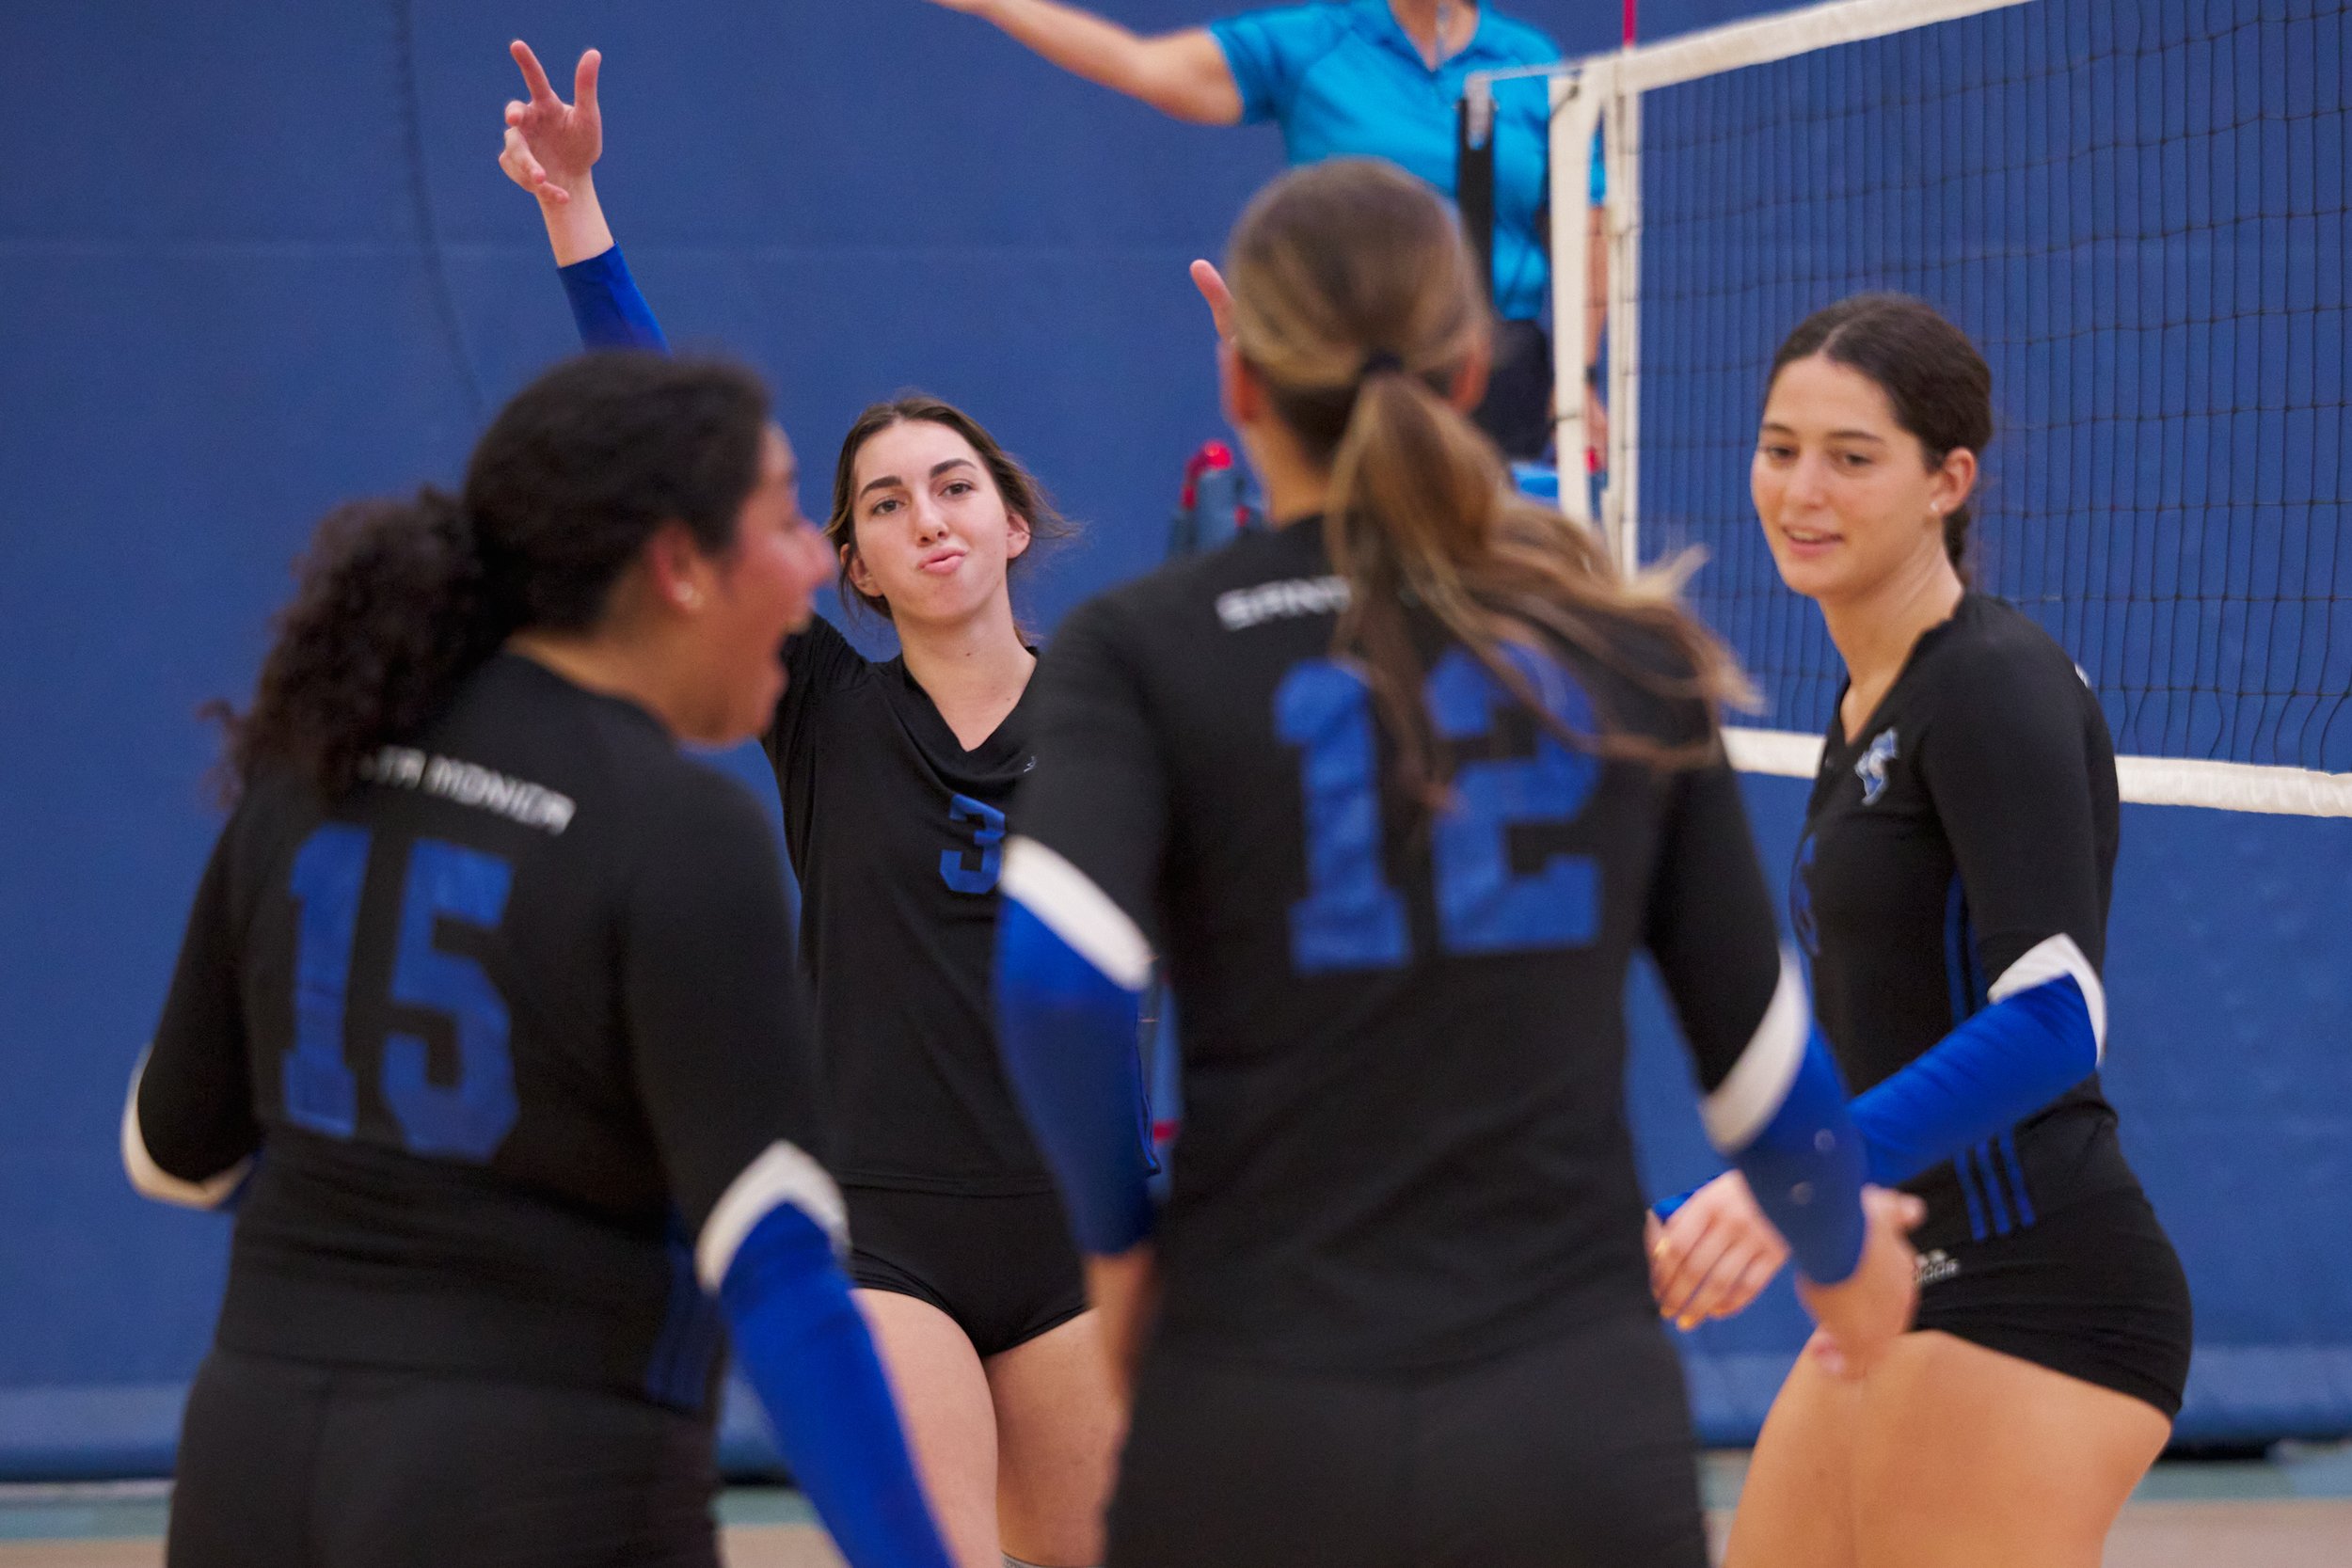  Santa Monica College Corsairs' Madison Schweitzer (3) celebrates scoring a kill against the Cuyamaca College Coyotes during the women's volleyball match on Wednesday, Sept. 6, 2023, at the SMC Gym in Santa Monica, Calif. The Corsairs won 3-0. (Nicho